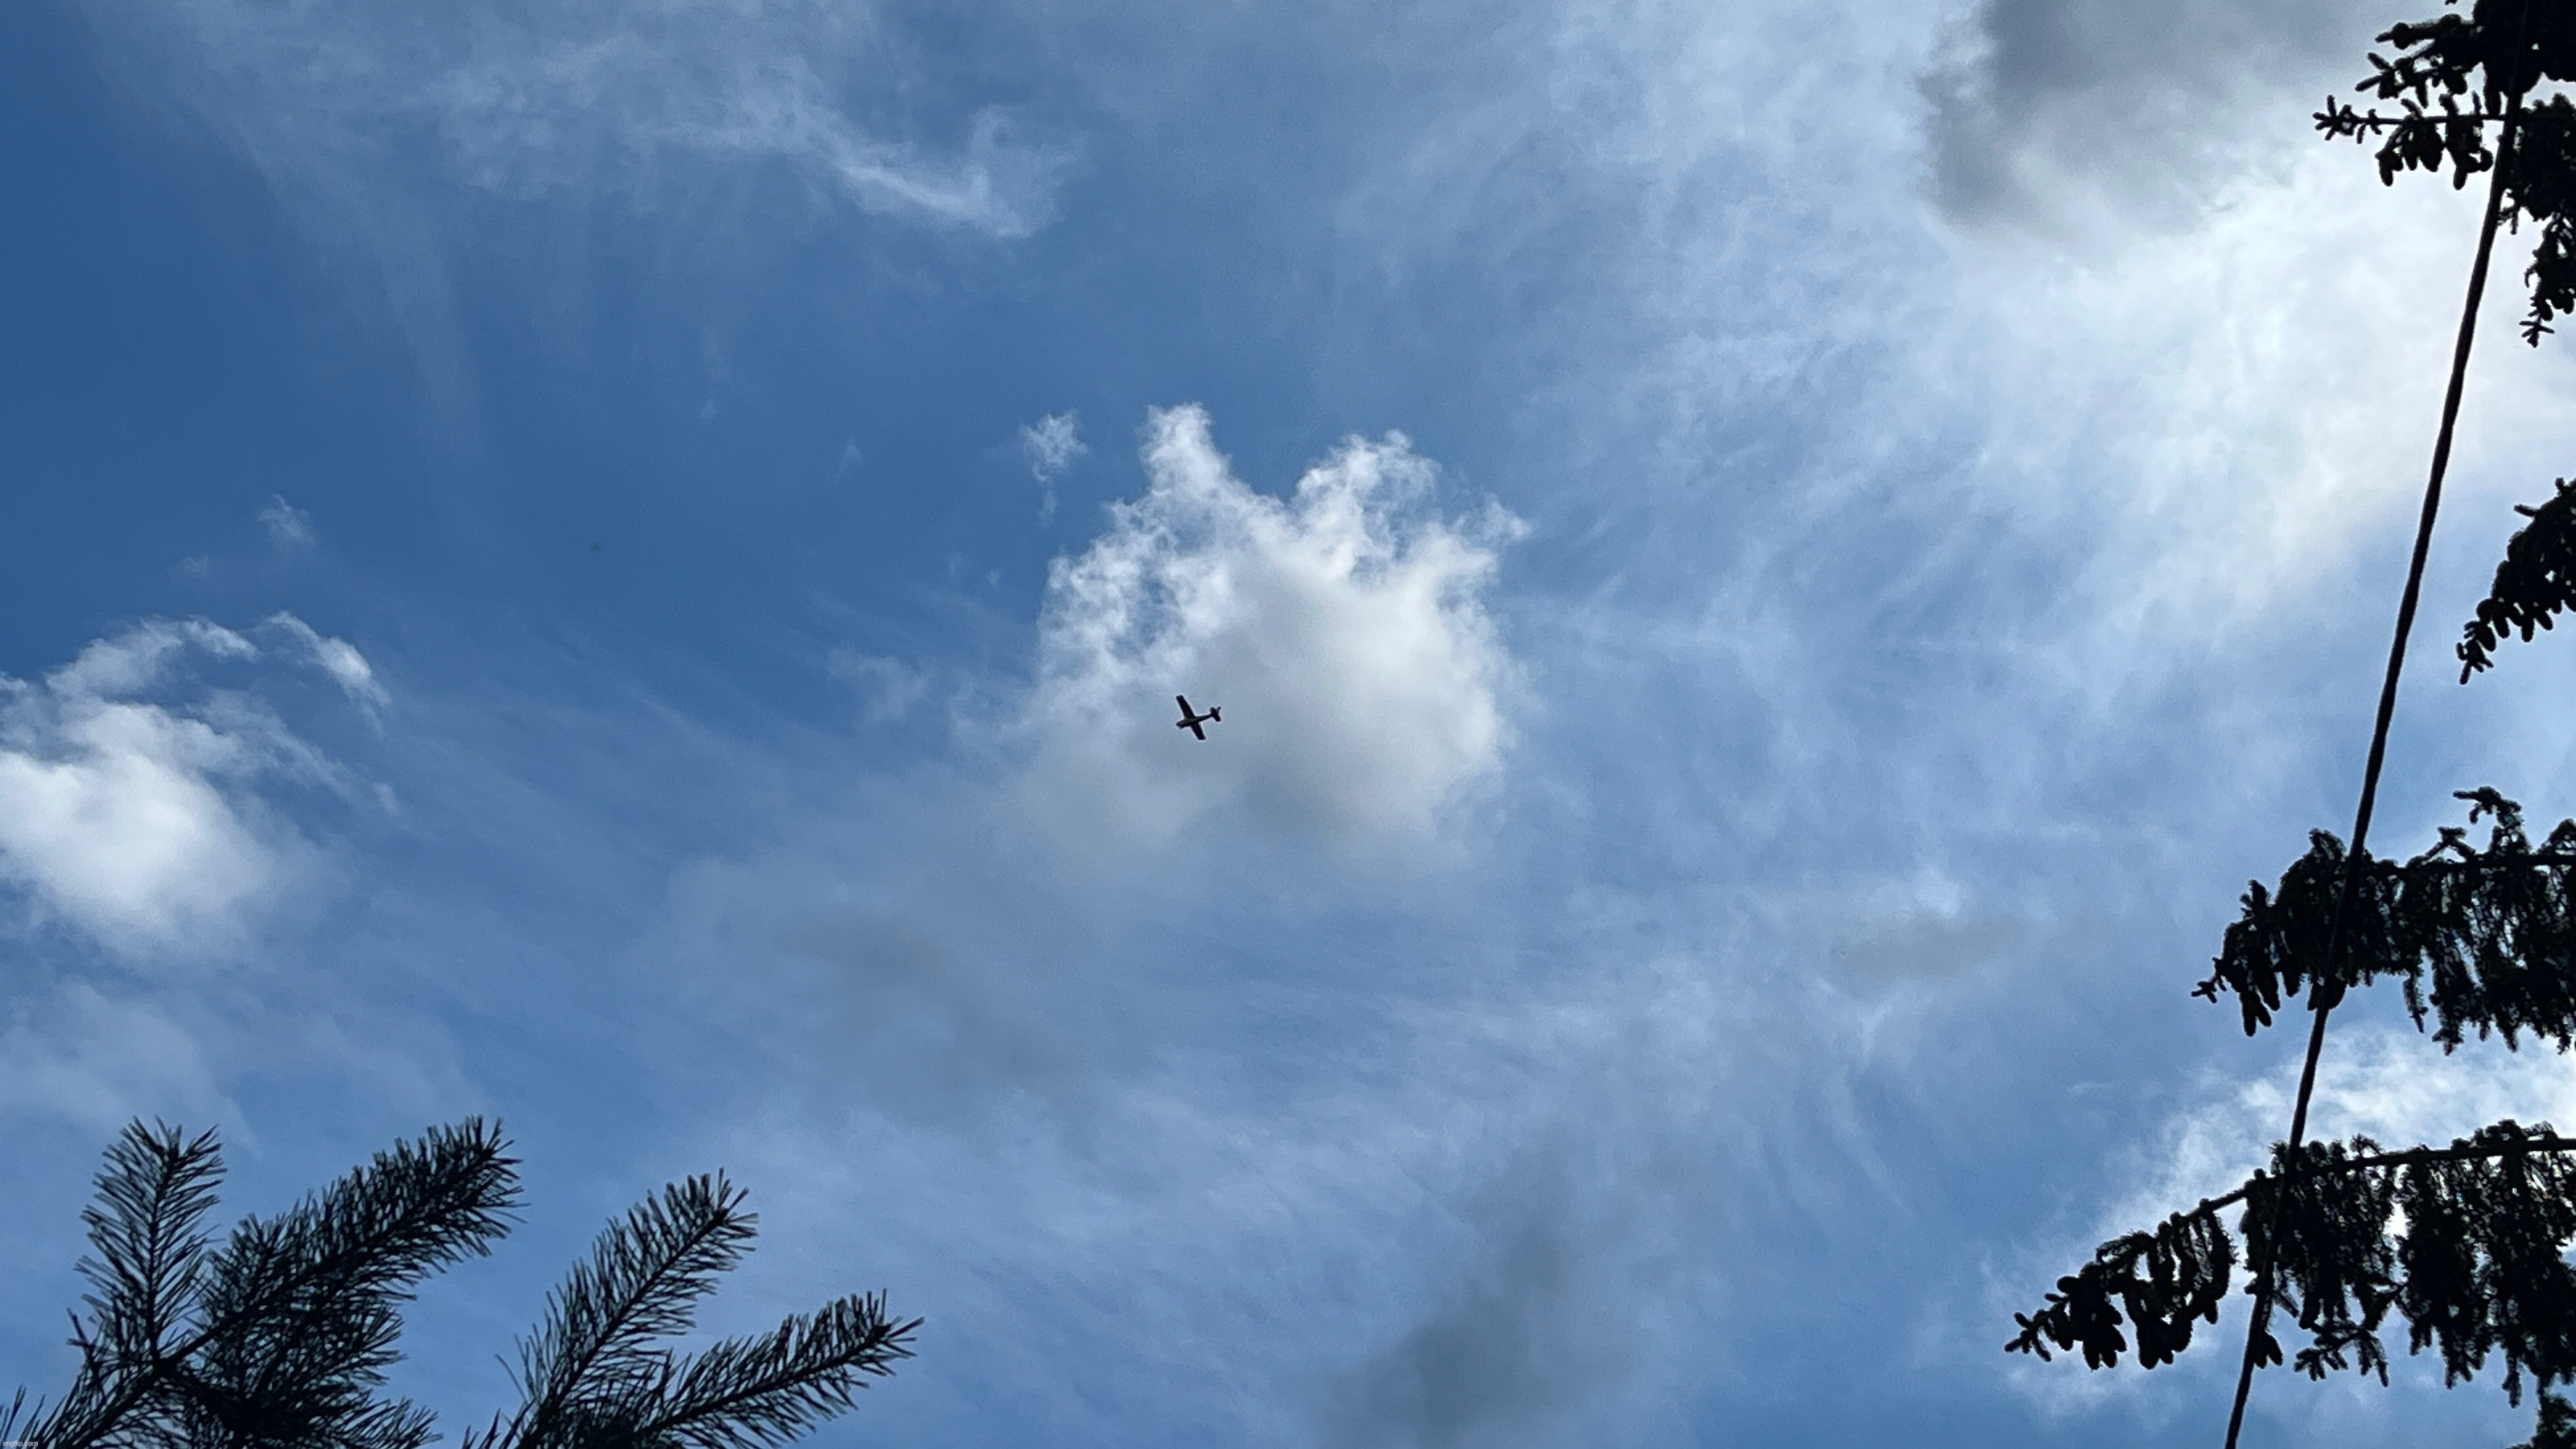 clouds and a PLNE | image tagged in share your own photos,clouds,plane,yes | made w/ Imgflip meme maker